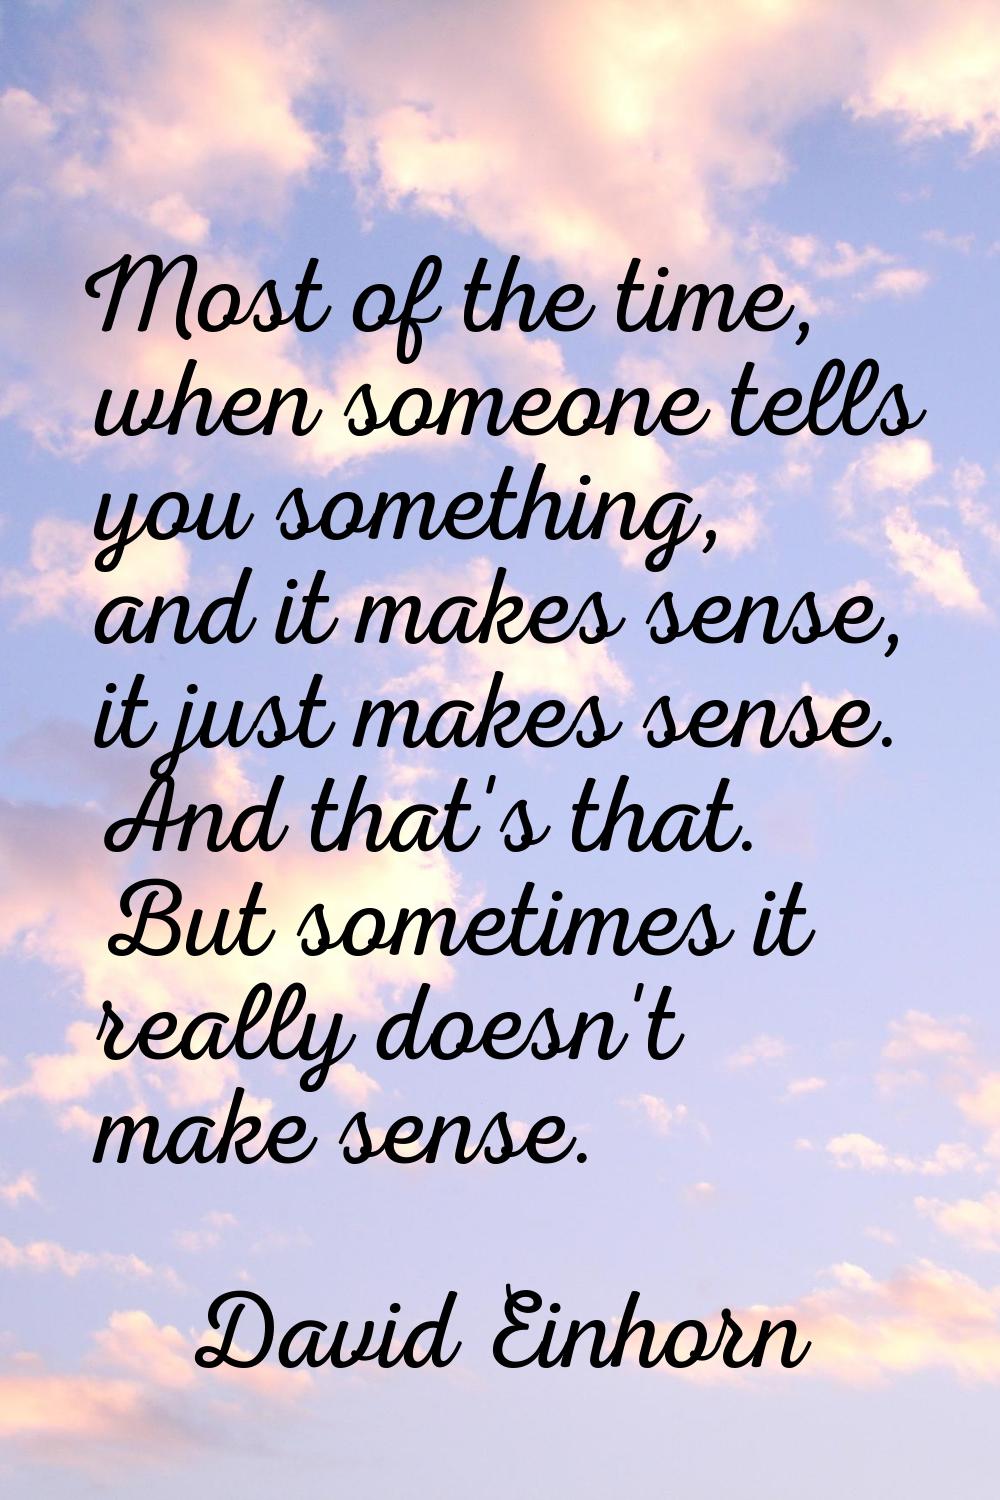 Most of the time, when someone tells you something, and it makes sense, it just makes sense. And th